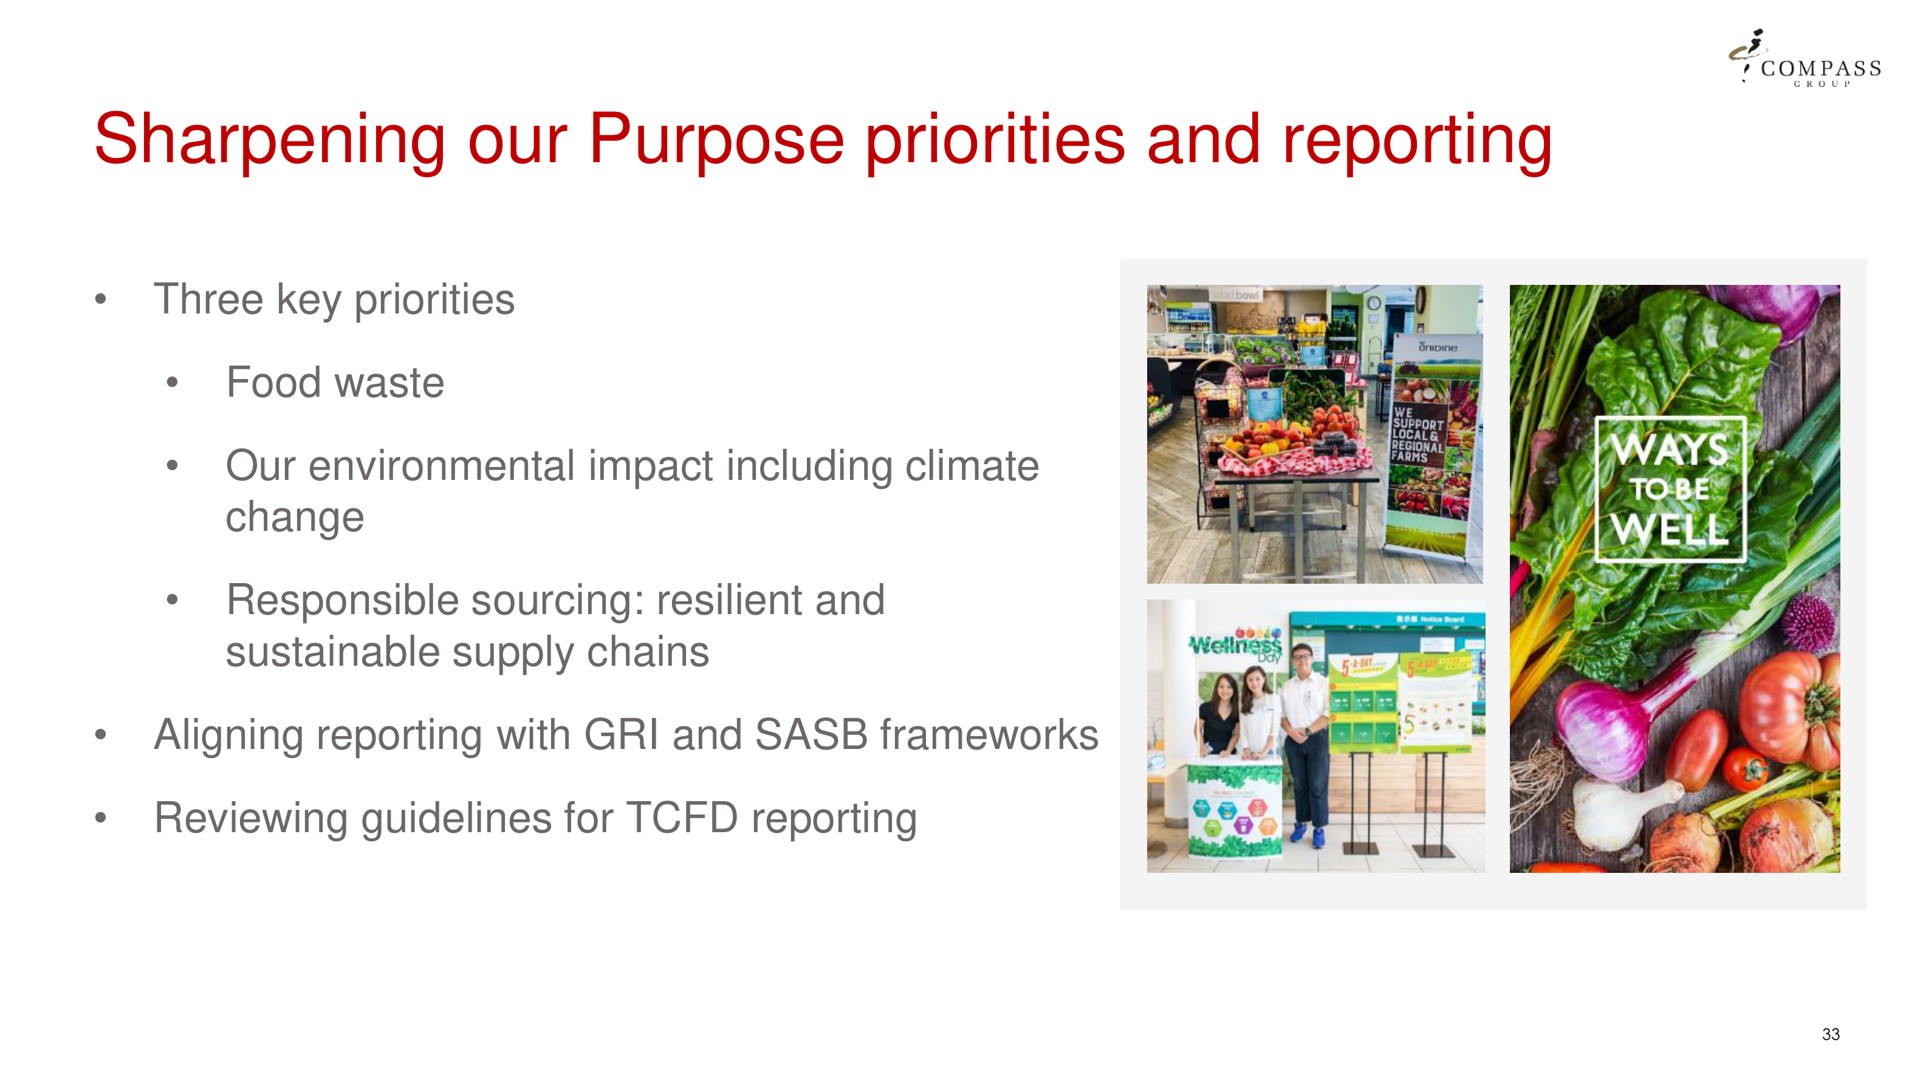 sharpening our purpose priorities and reporting | Compass Group